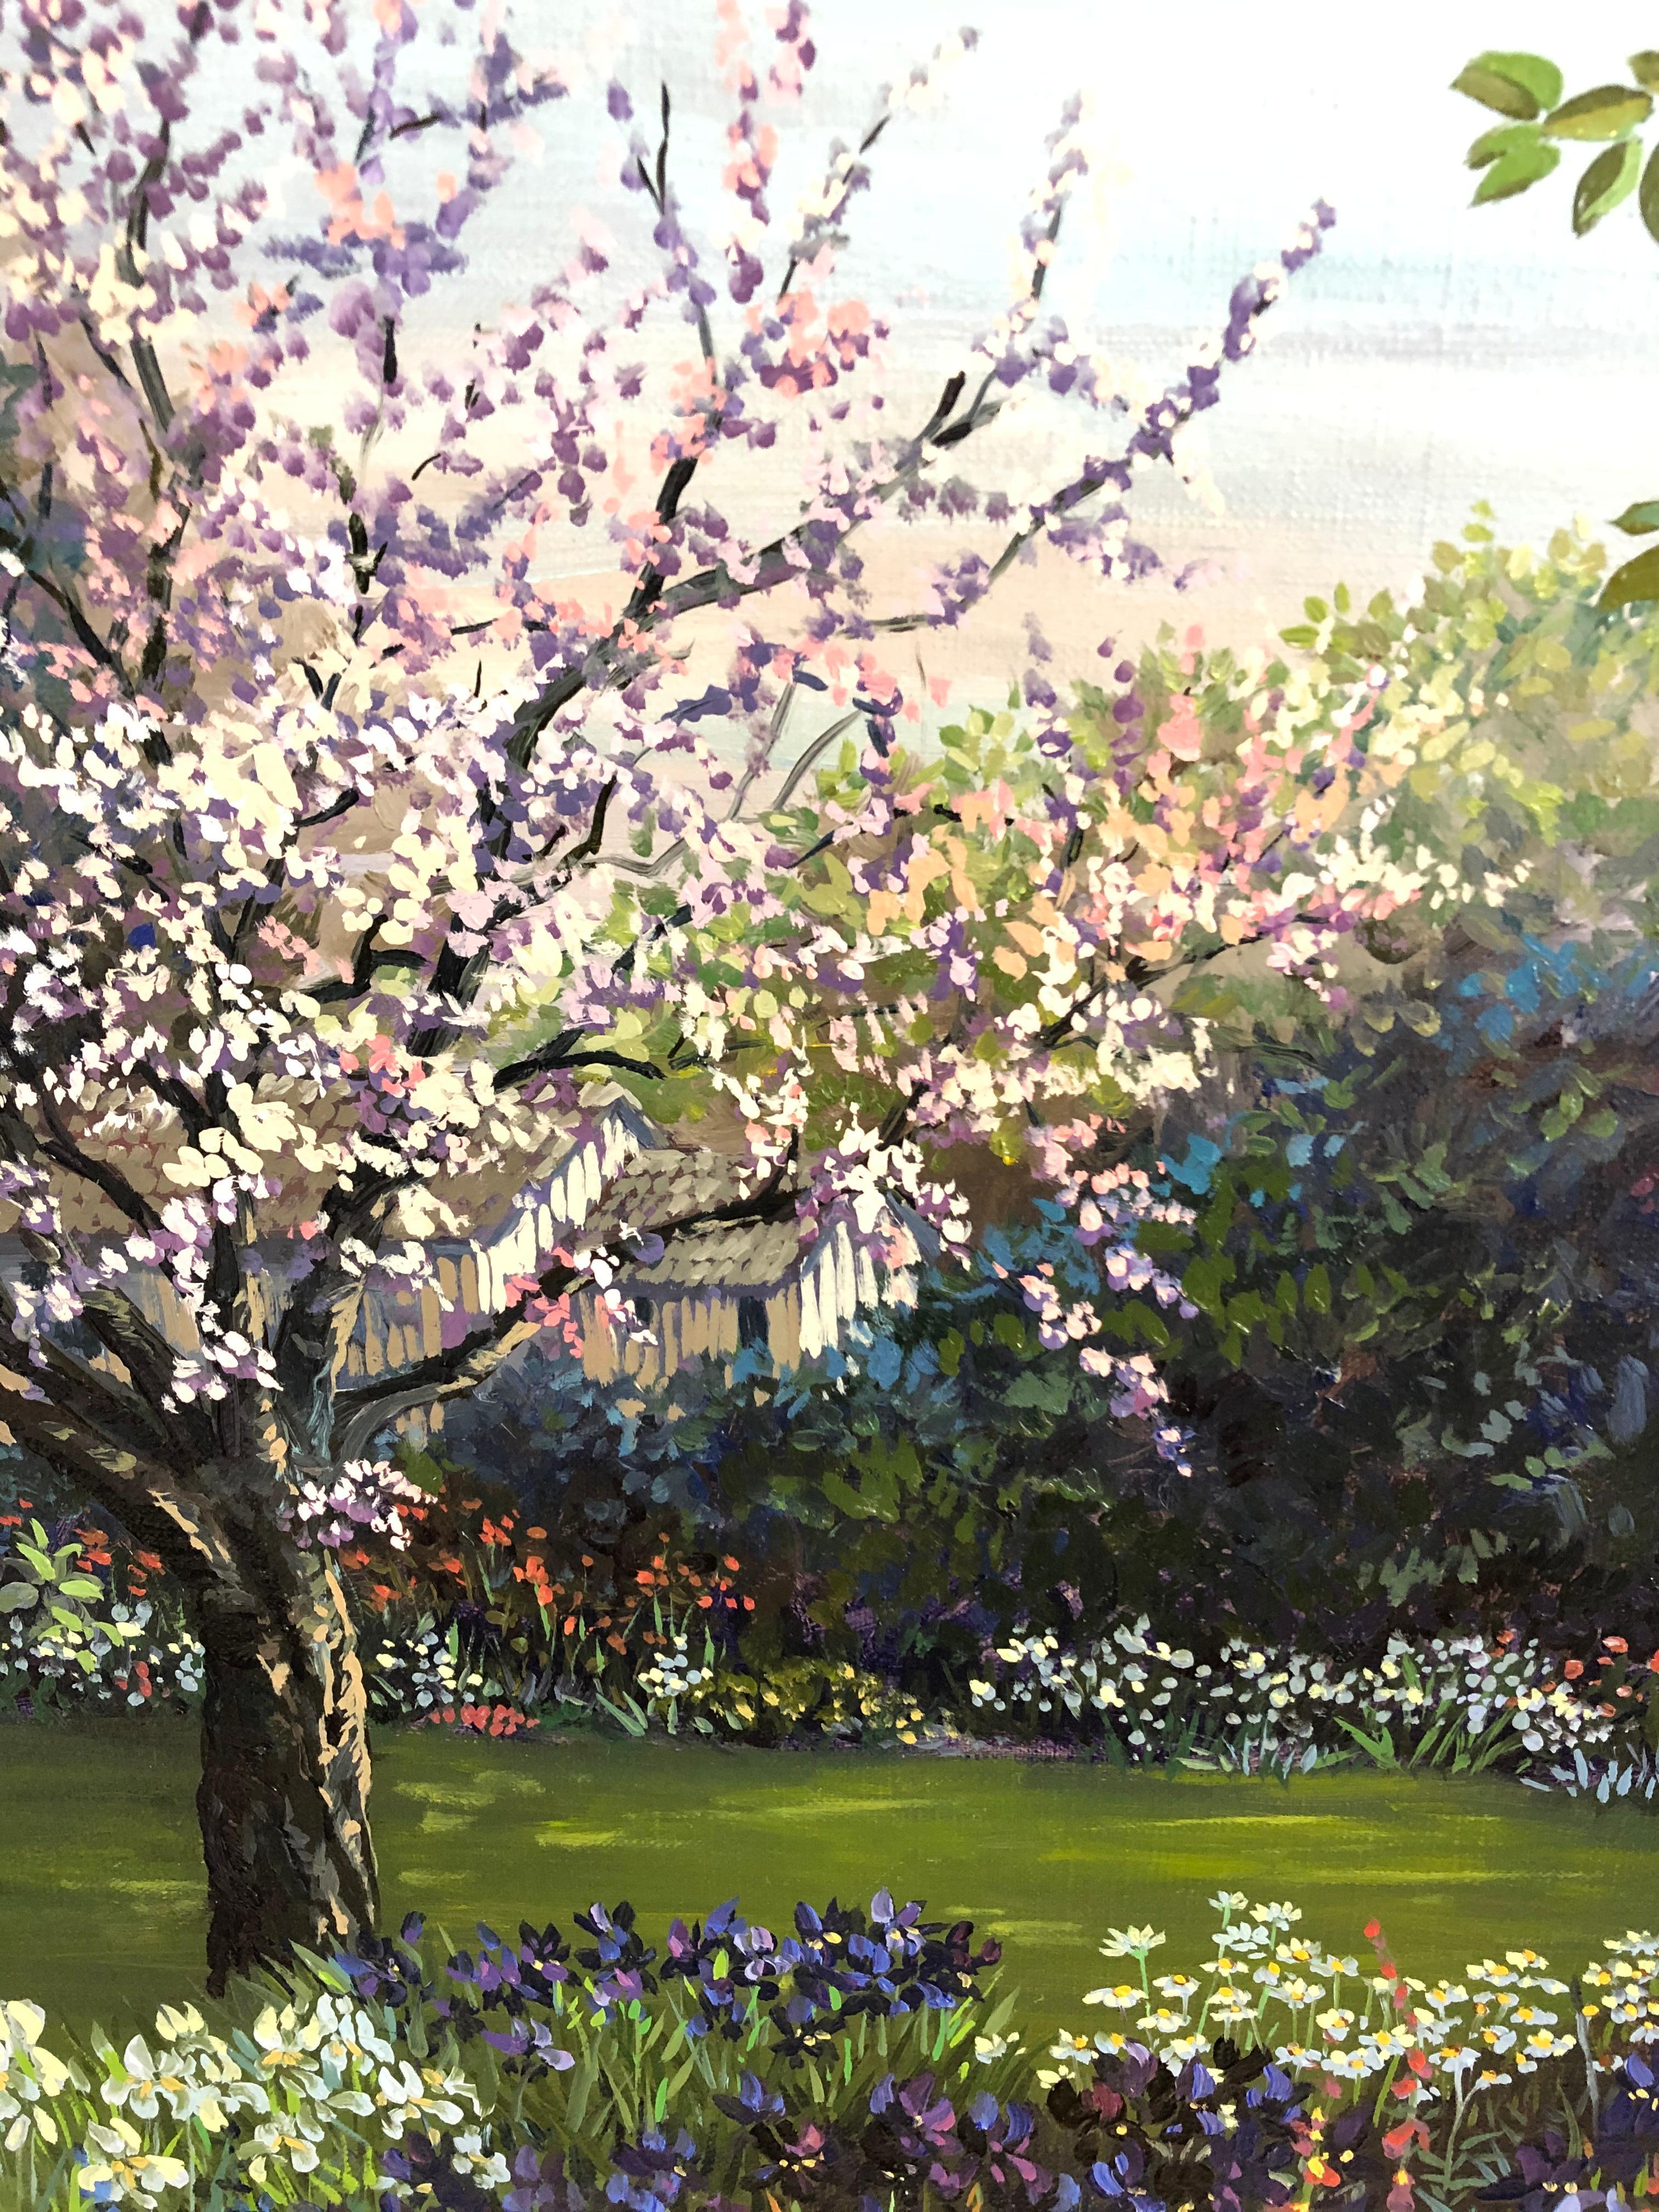 Beautifully painted by acclaimed artist John Powell in his signature lyrical realism style, Peachtree Cottage depicts a garden pulsating with life, precise, intricate and expressing the California artist's love of flowers and nature.
canvas 18 x